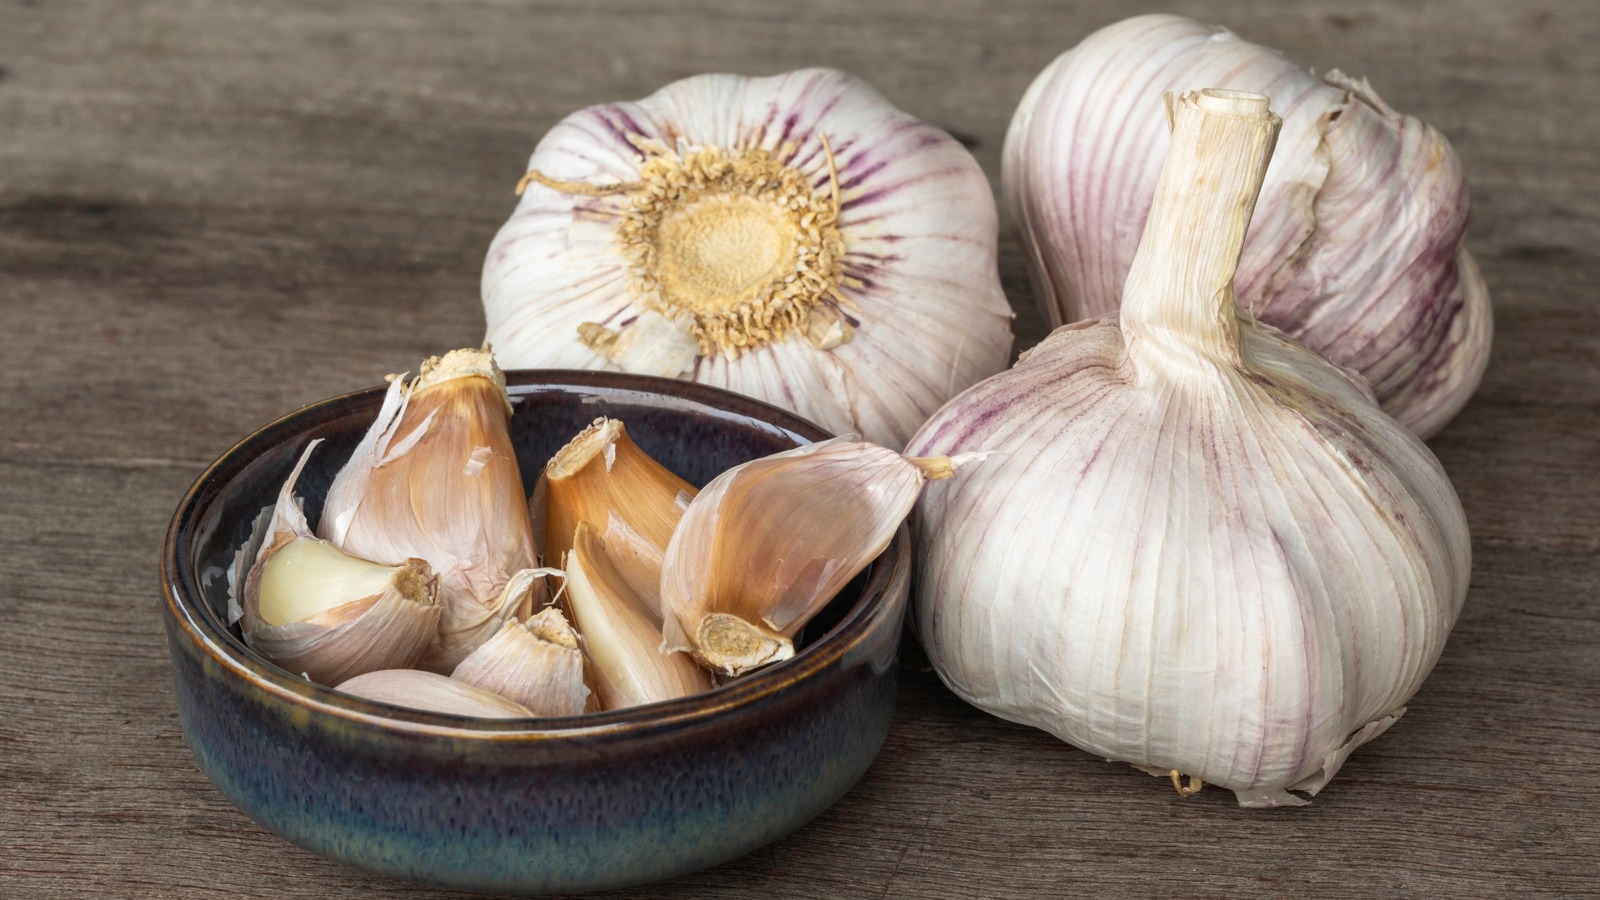 How To Prevent Garlic From Turning That Odd Green Color